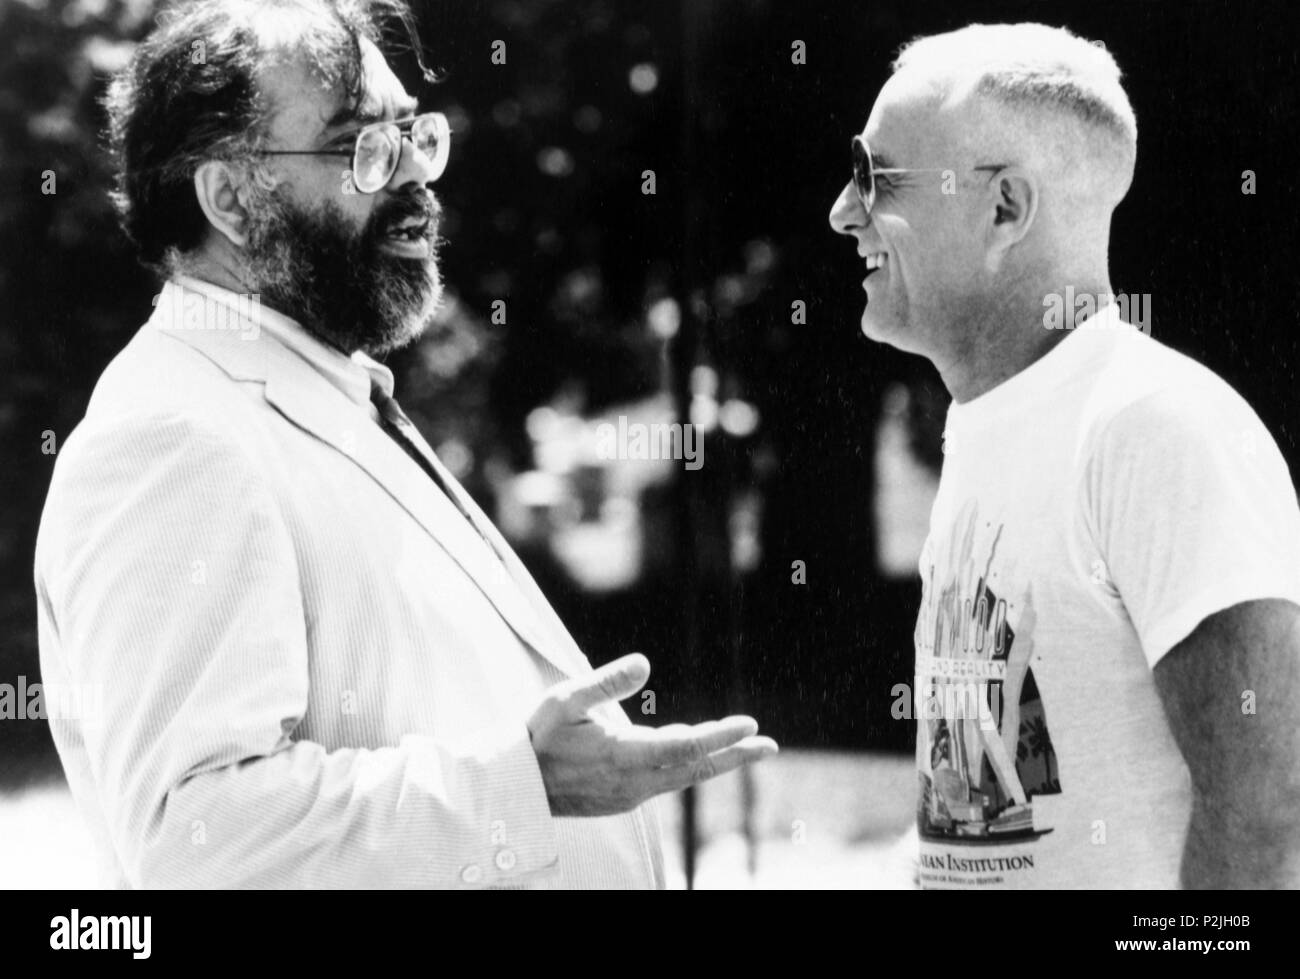 Francis ford coppola Black and White Stock Photos & Images - Alamy